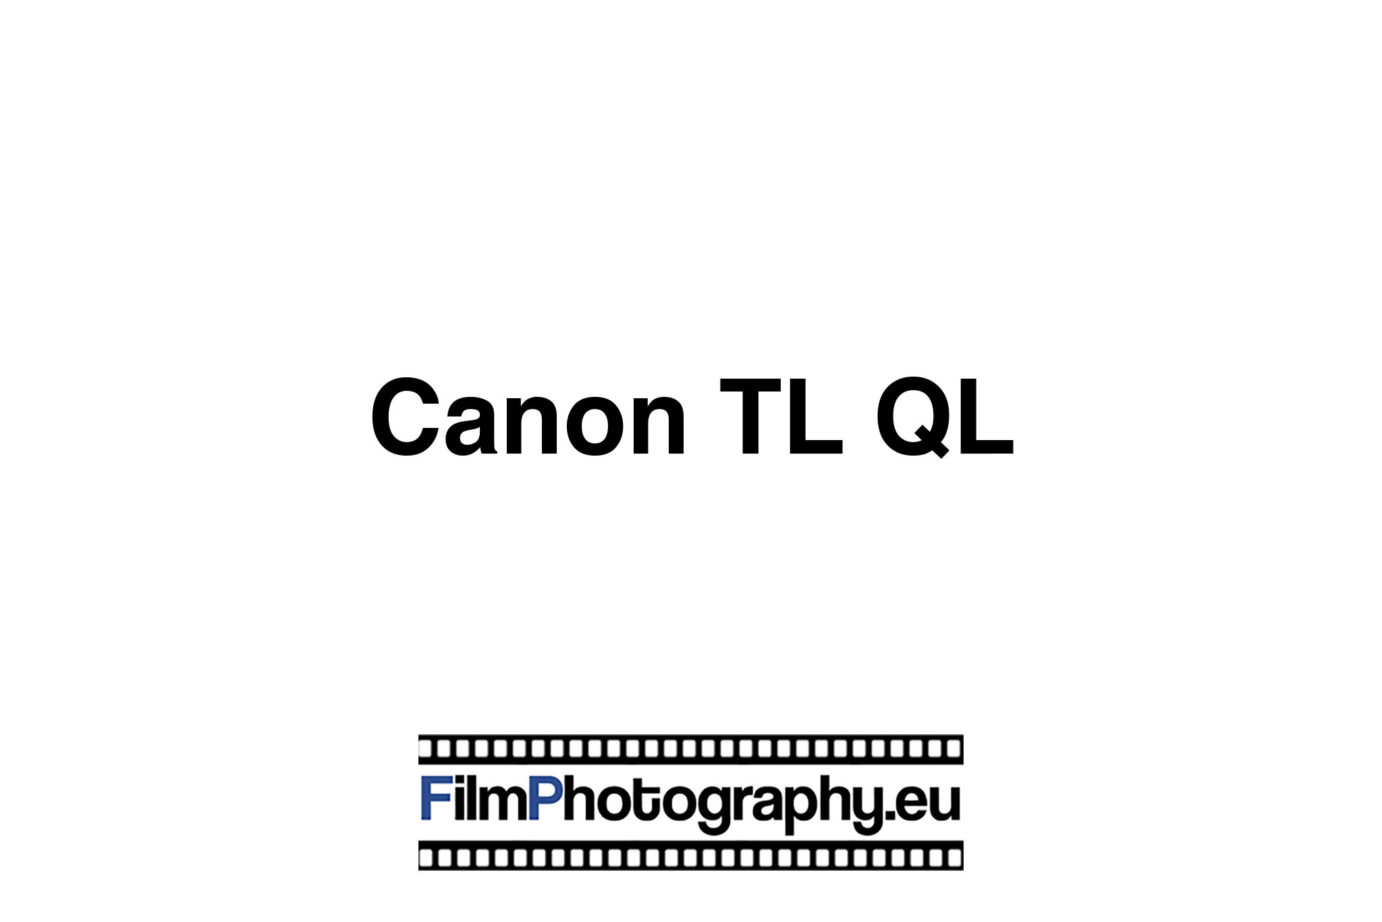 Canon TL QL - Learn more about the last FT model from Canon